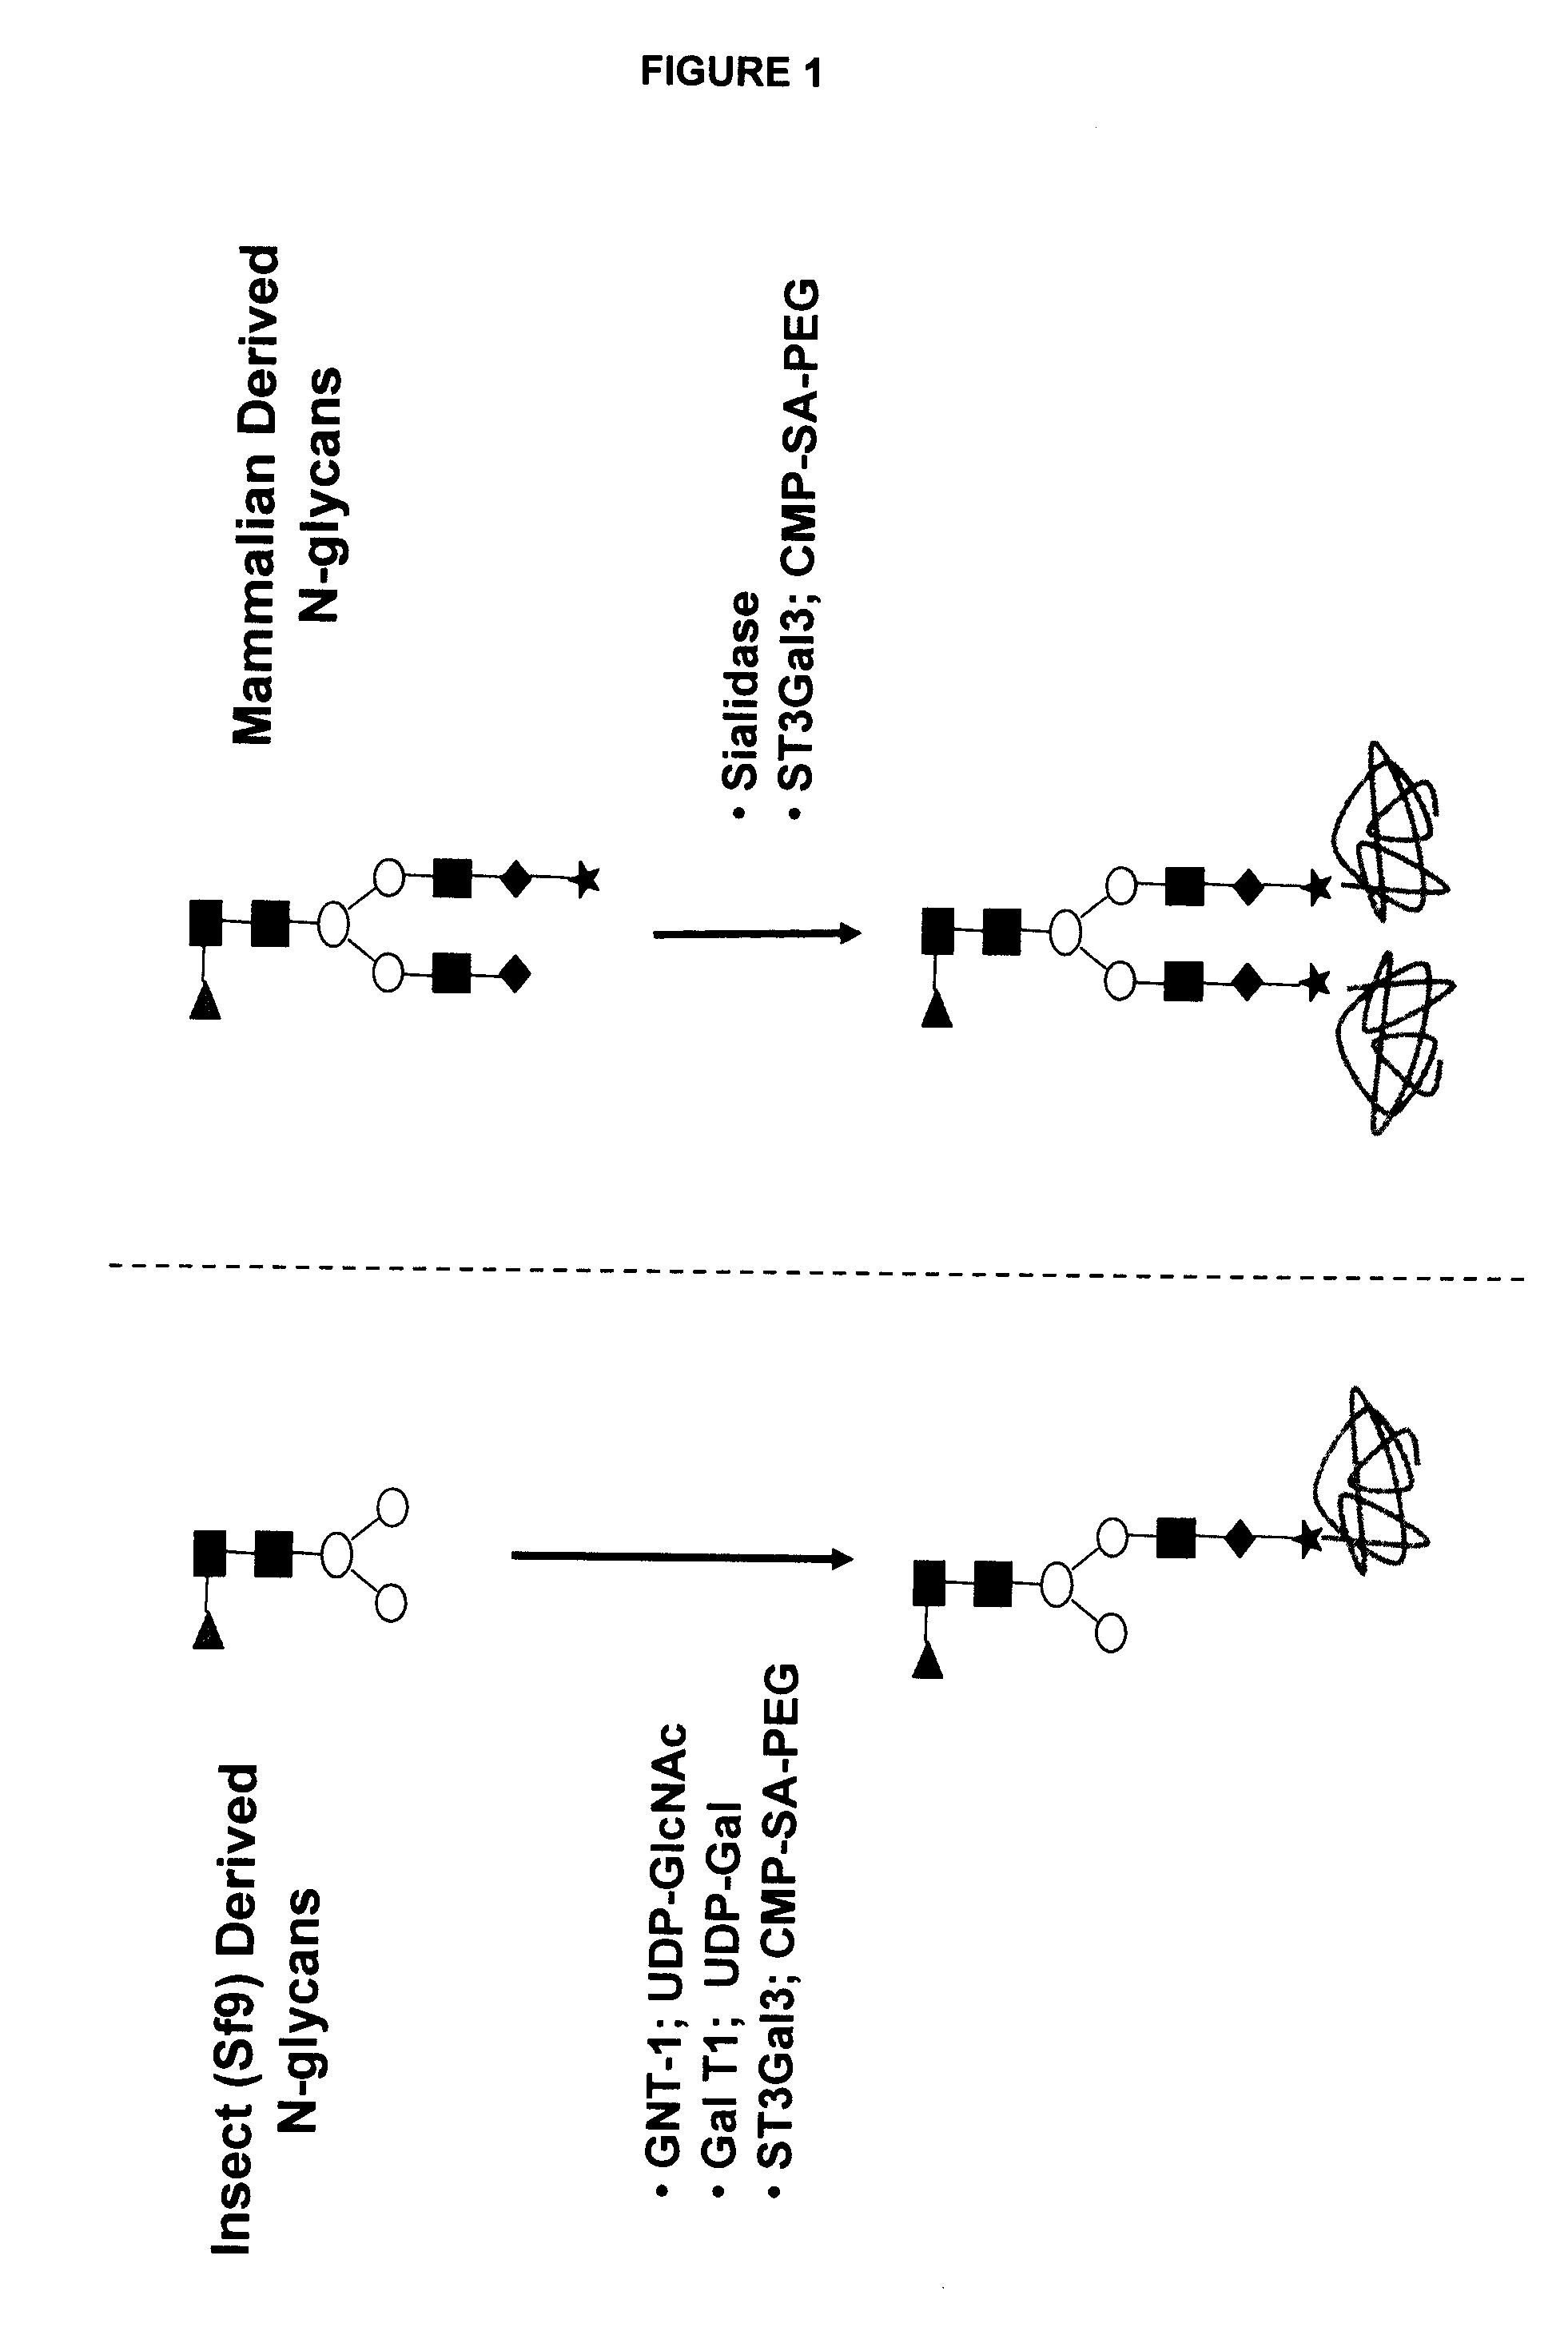 Compositions and methods for the preparation of protease resistant human growth hormone glycosylation mutants